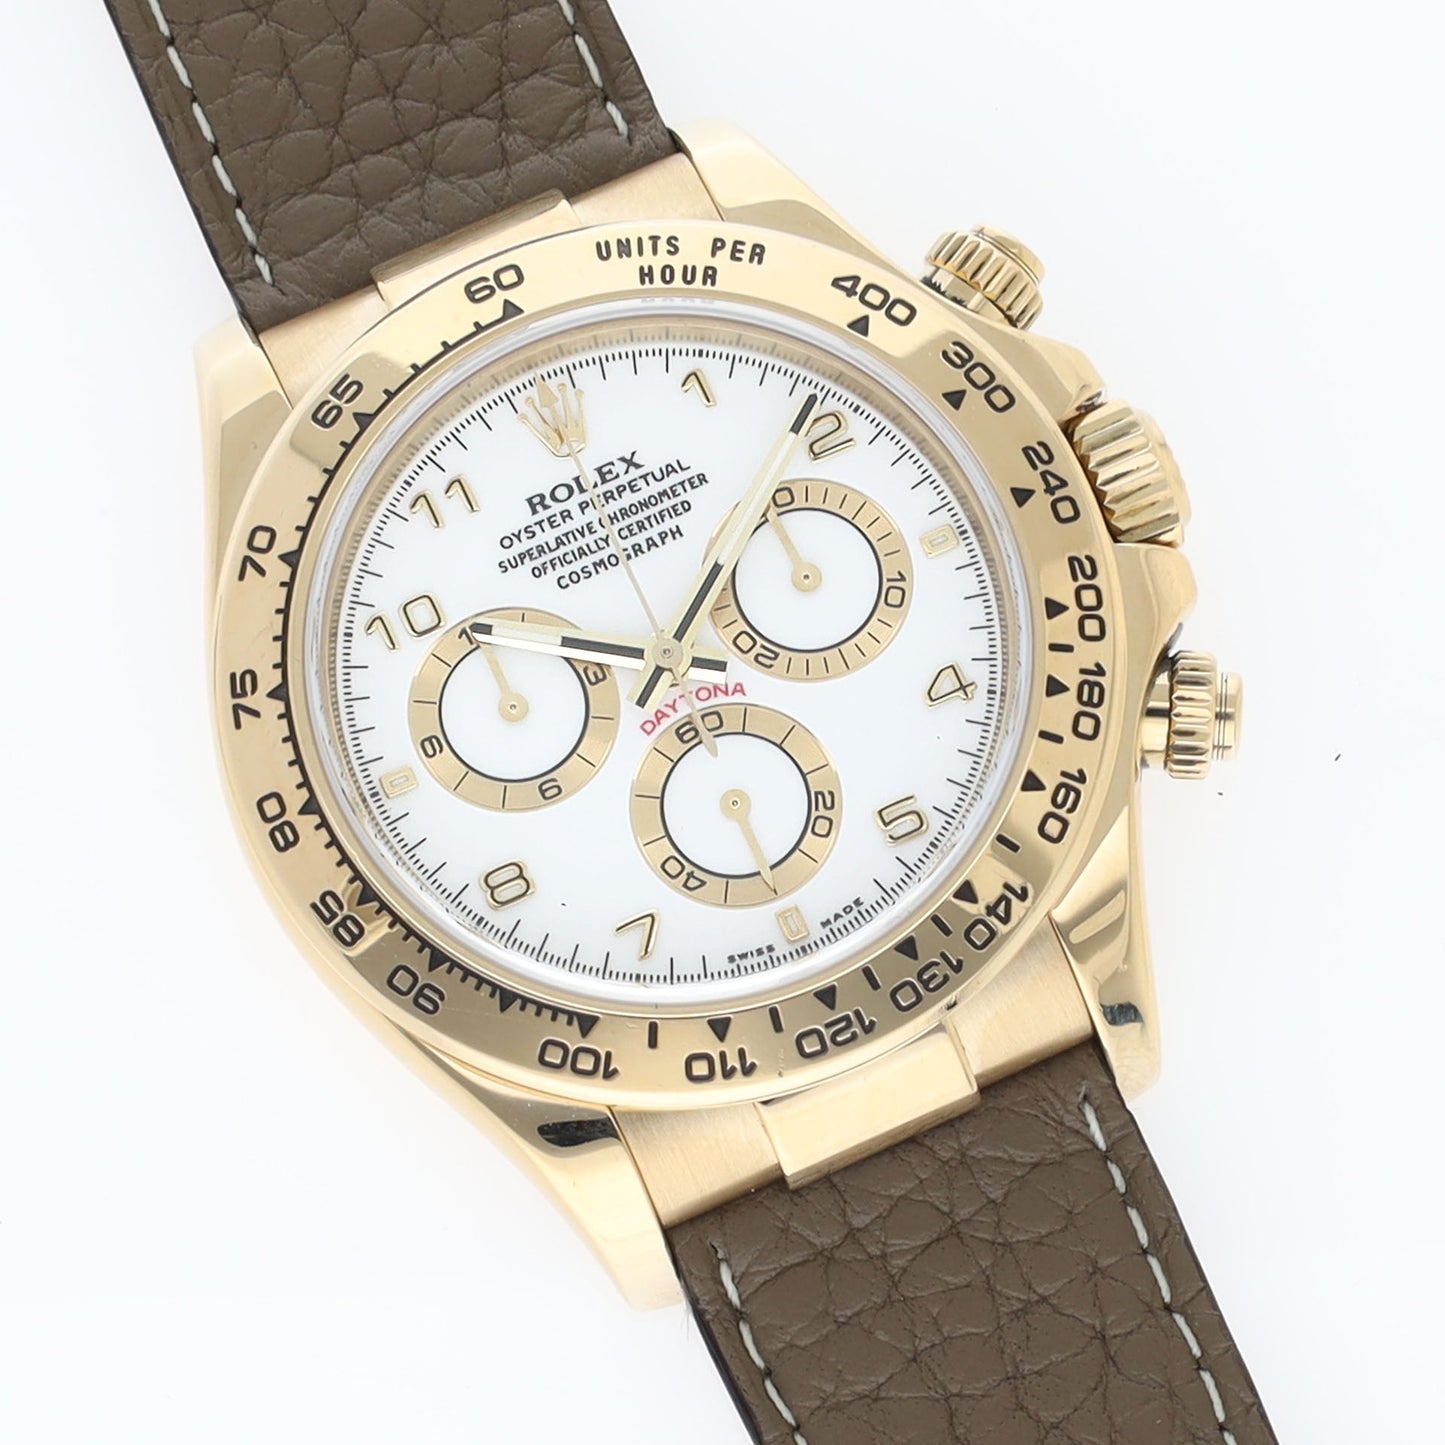 Rolex Daytona 116518 Yellow Gold Rare White Porcelain Dial with Papers